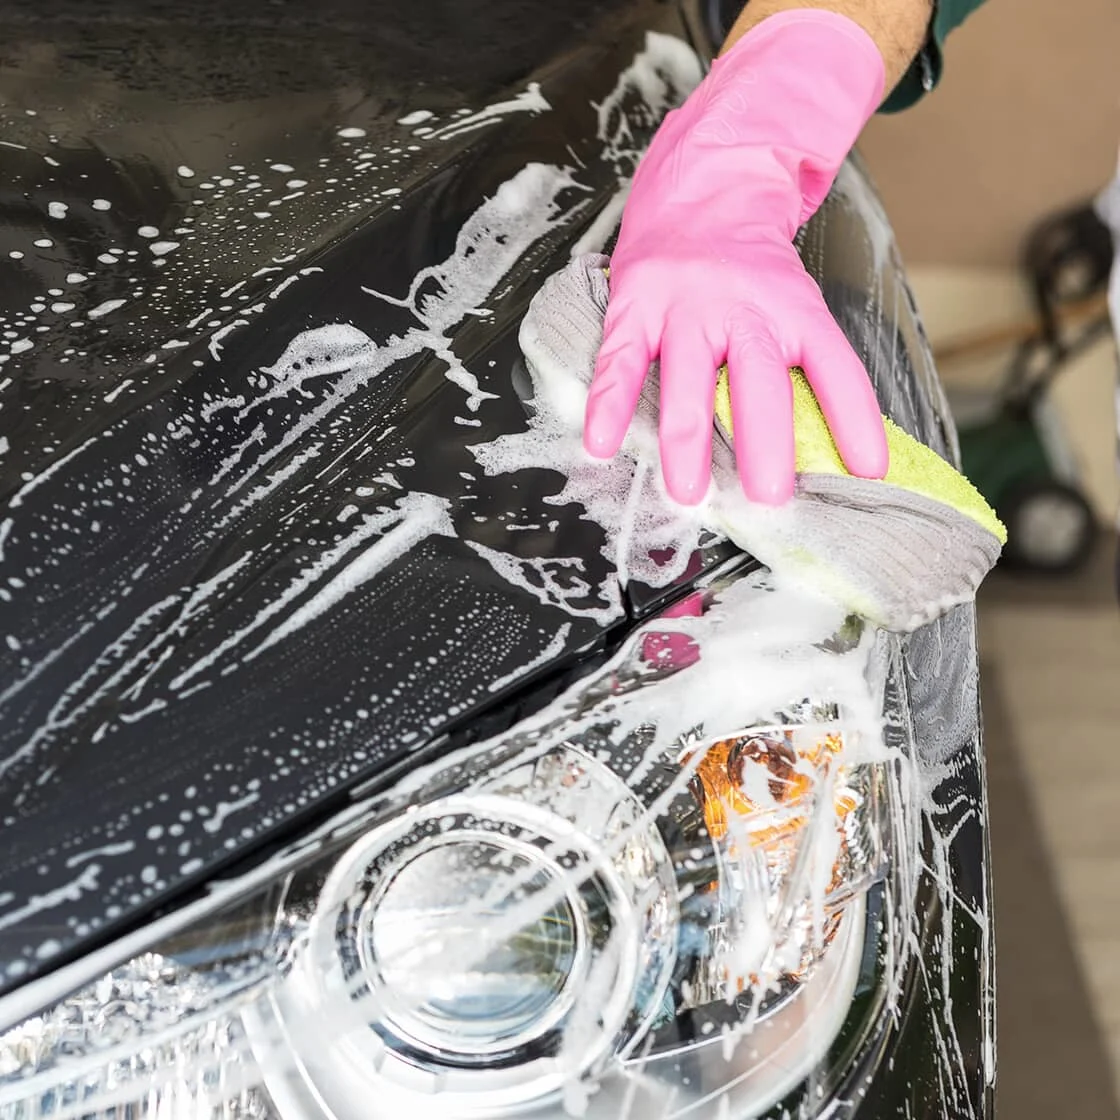 Is Your Ride in Need of a Refresh? Here's How to Clean Your Car